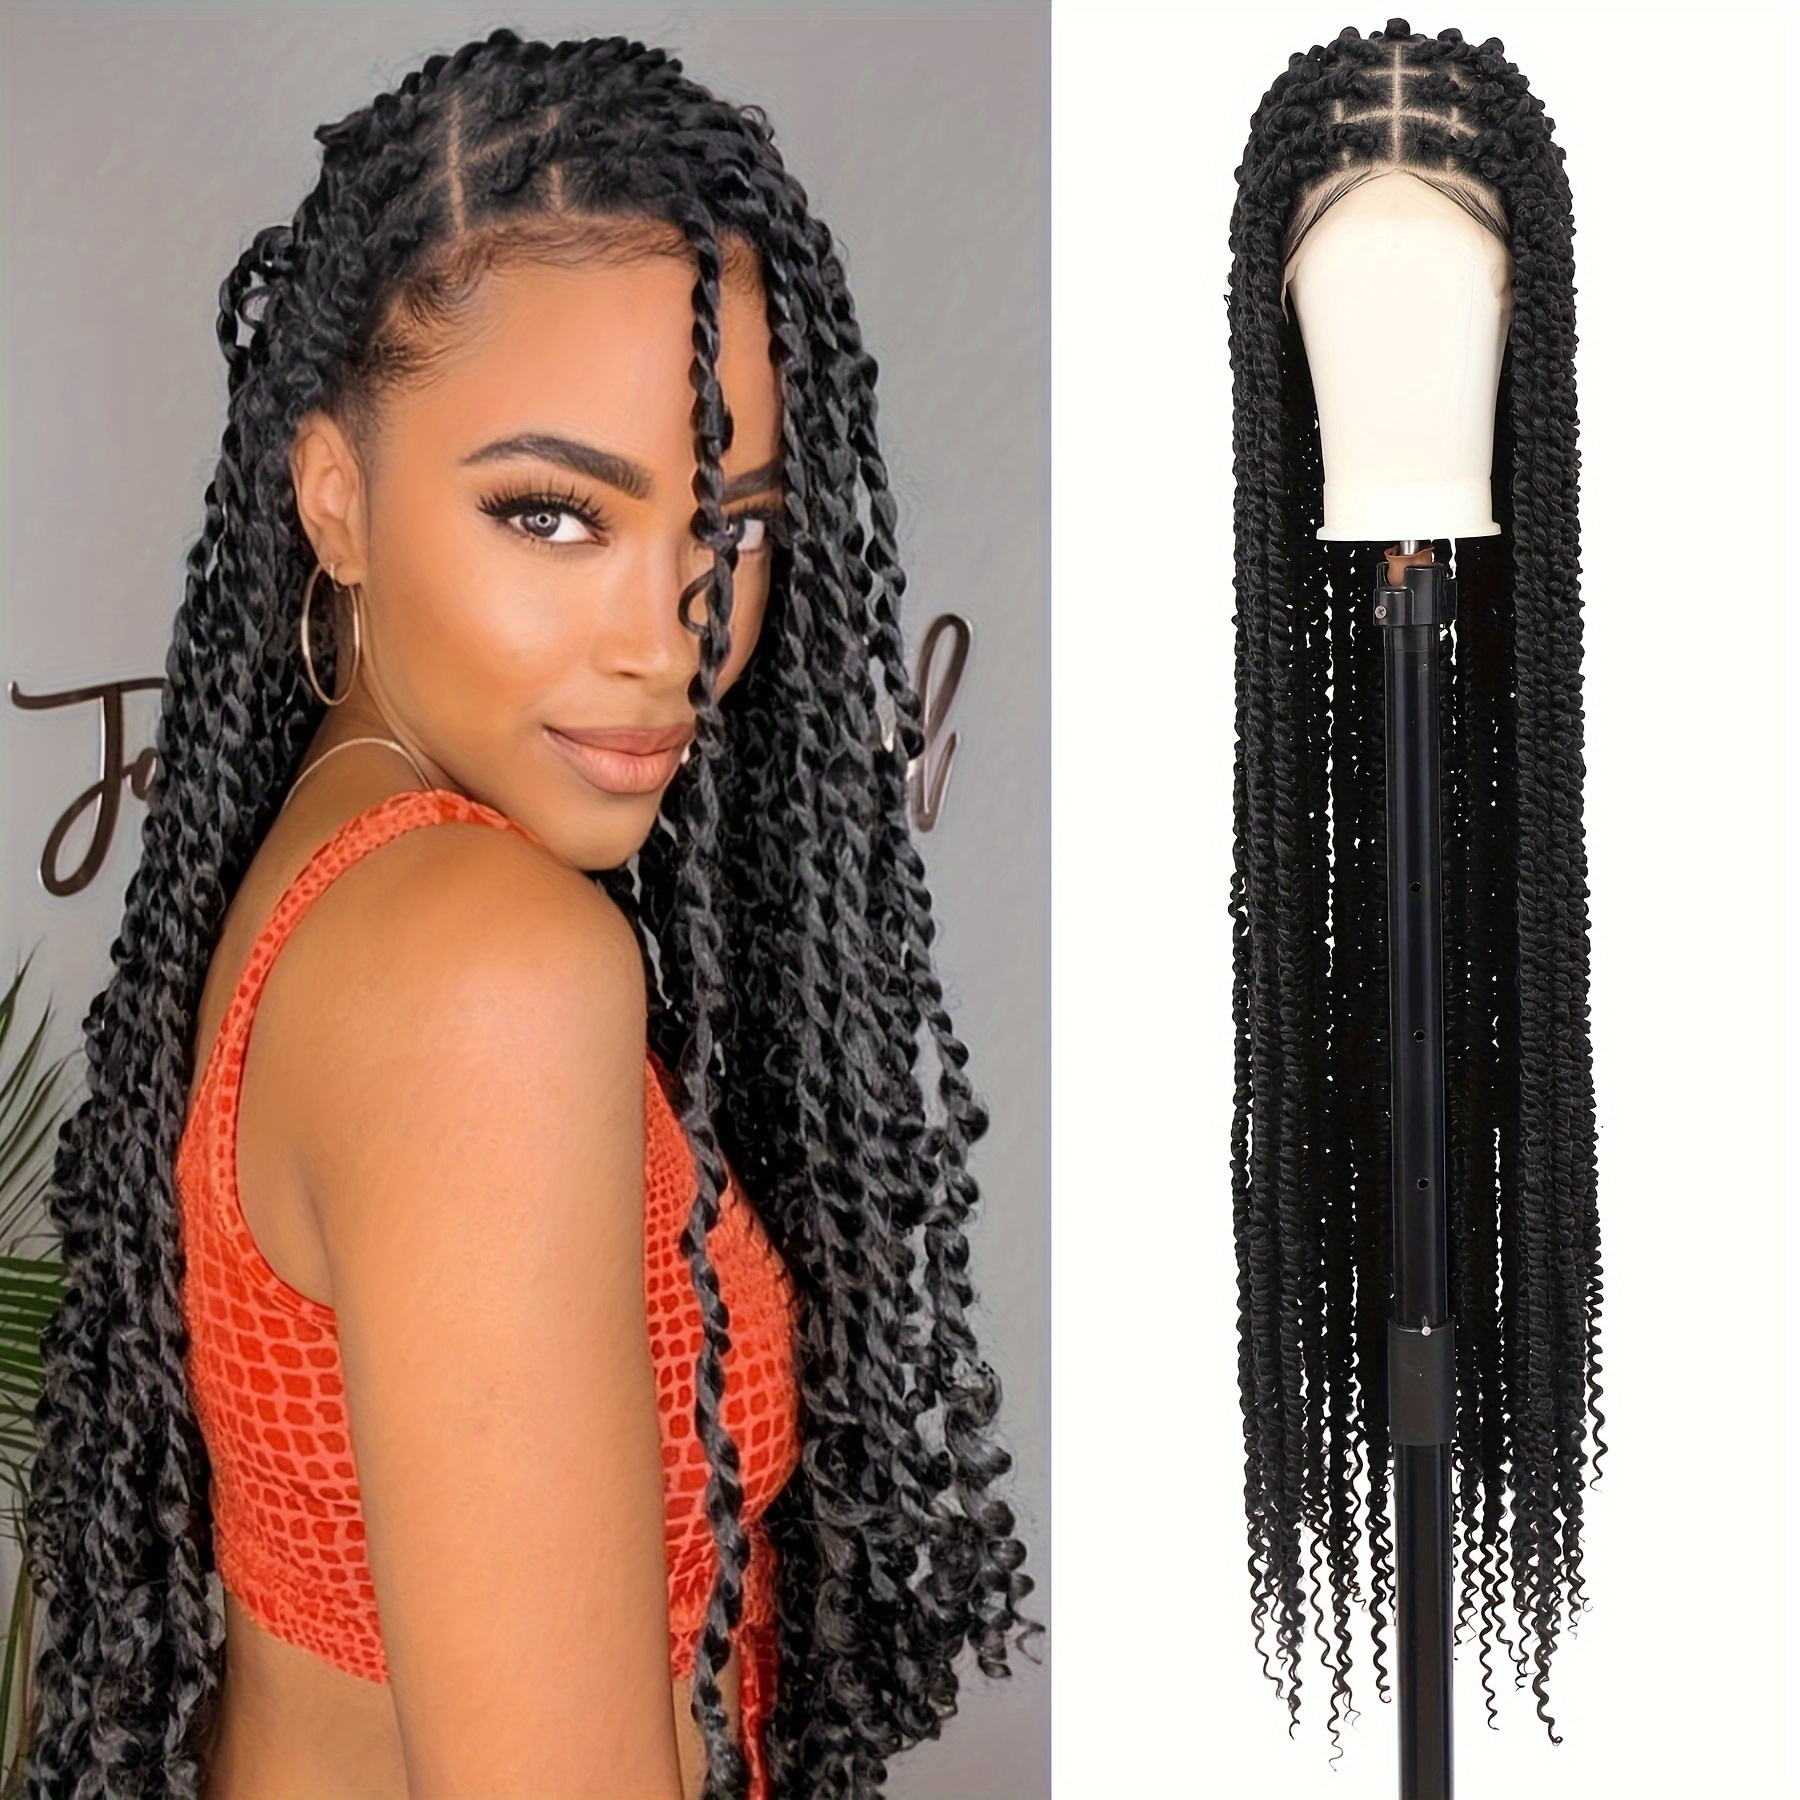 Braided Wigs 30 Inch Long Box Braids Lace Front Wigs With Baby Hair  Synthetic Box Braids Wigs Black Ombre Brown For Black Women TBUG lace  braided wig 1 PC : : Beauty